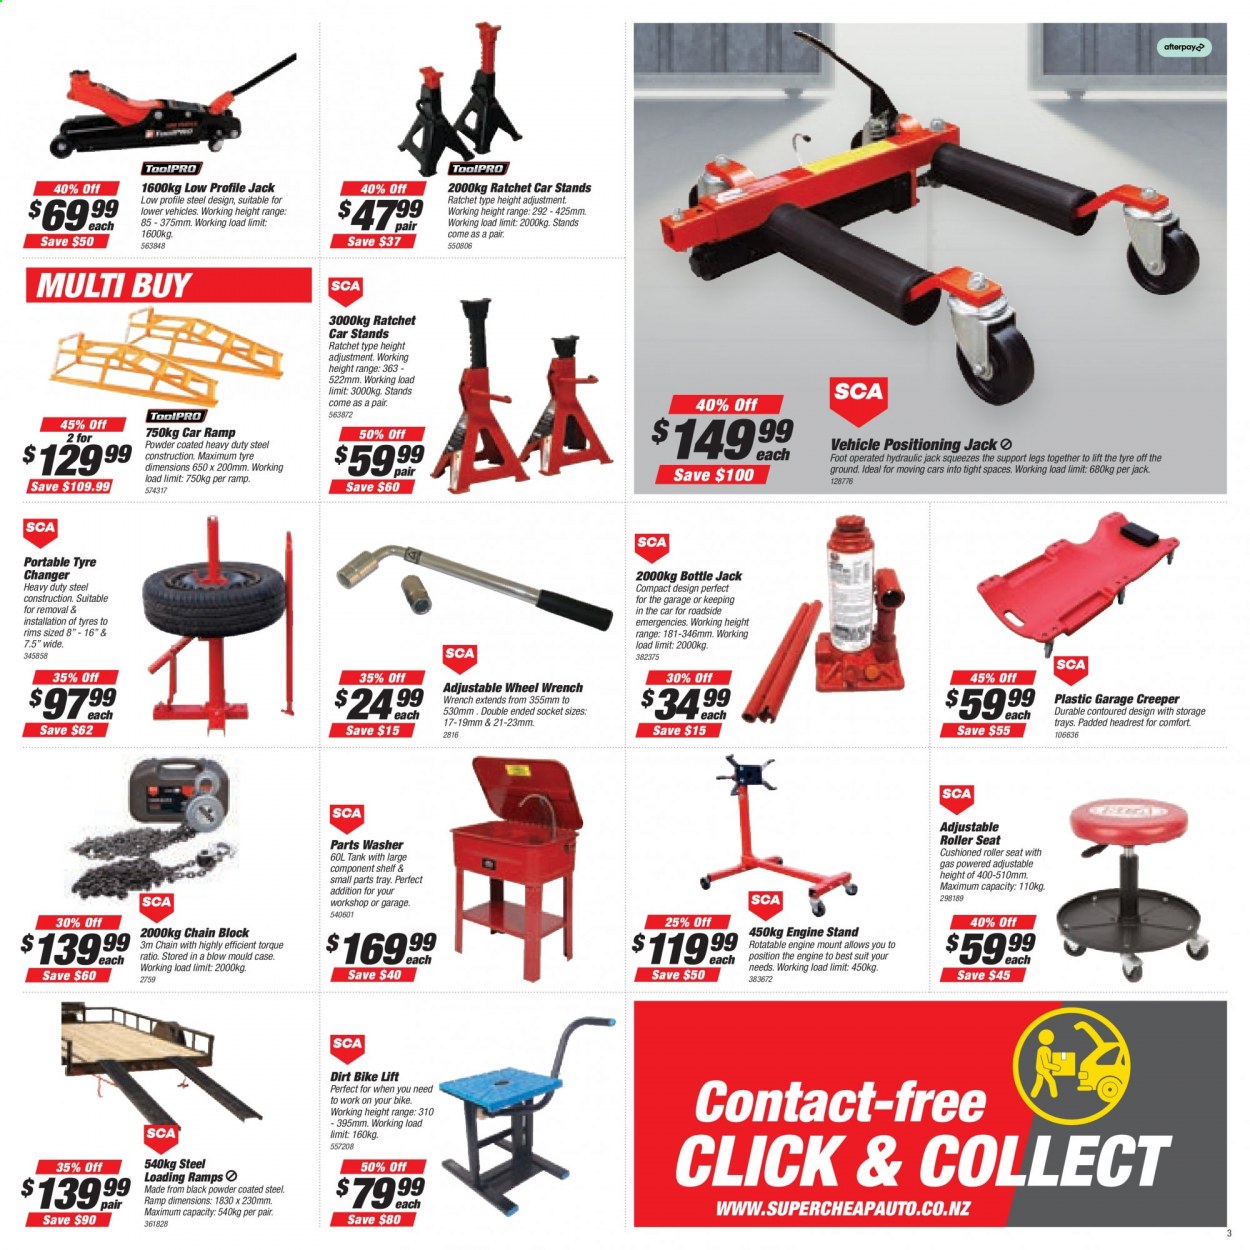 thumbnail - SuperCheap Auto mailer - 01.07.2021 - 11.07.2021 - Sales products - wrench, car ramps, low profile jack, tyre changer, vehicle positioning jack, tires. Page 3.